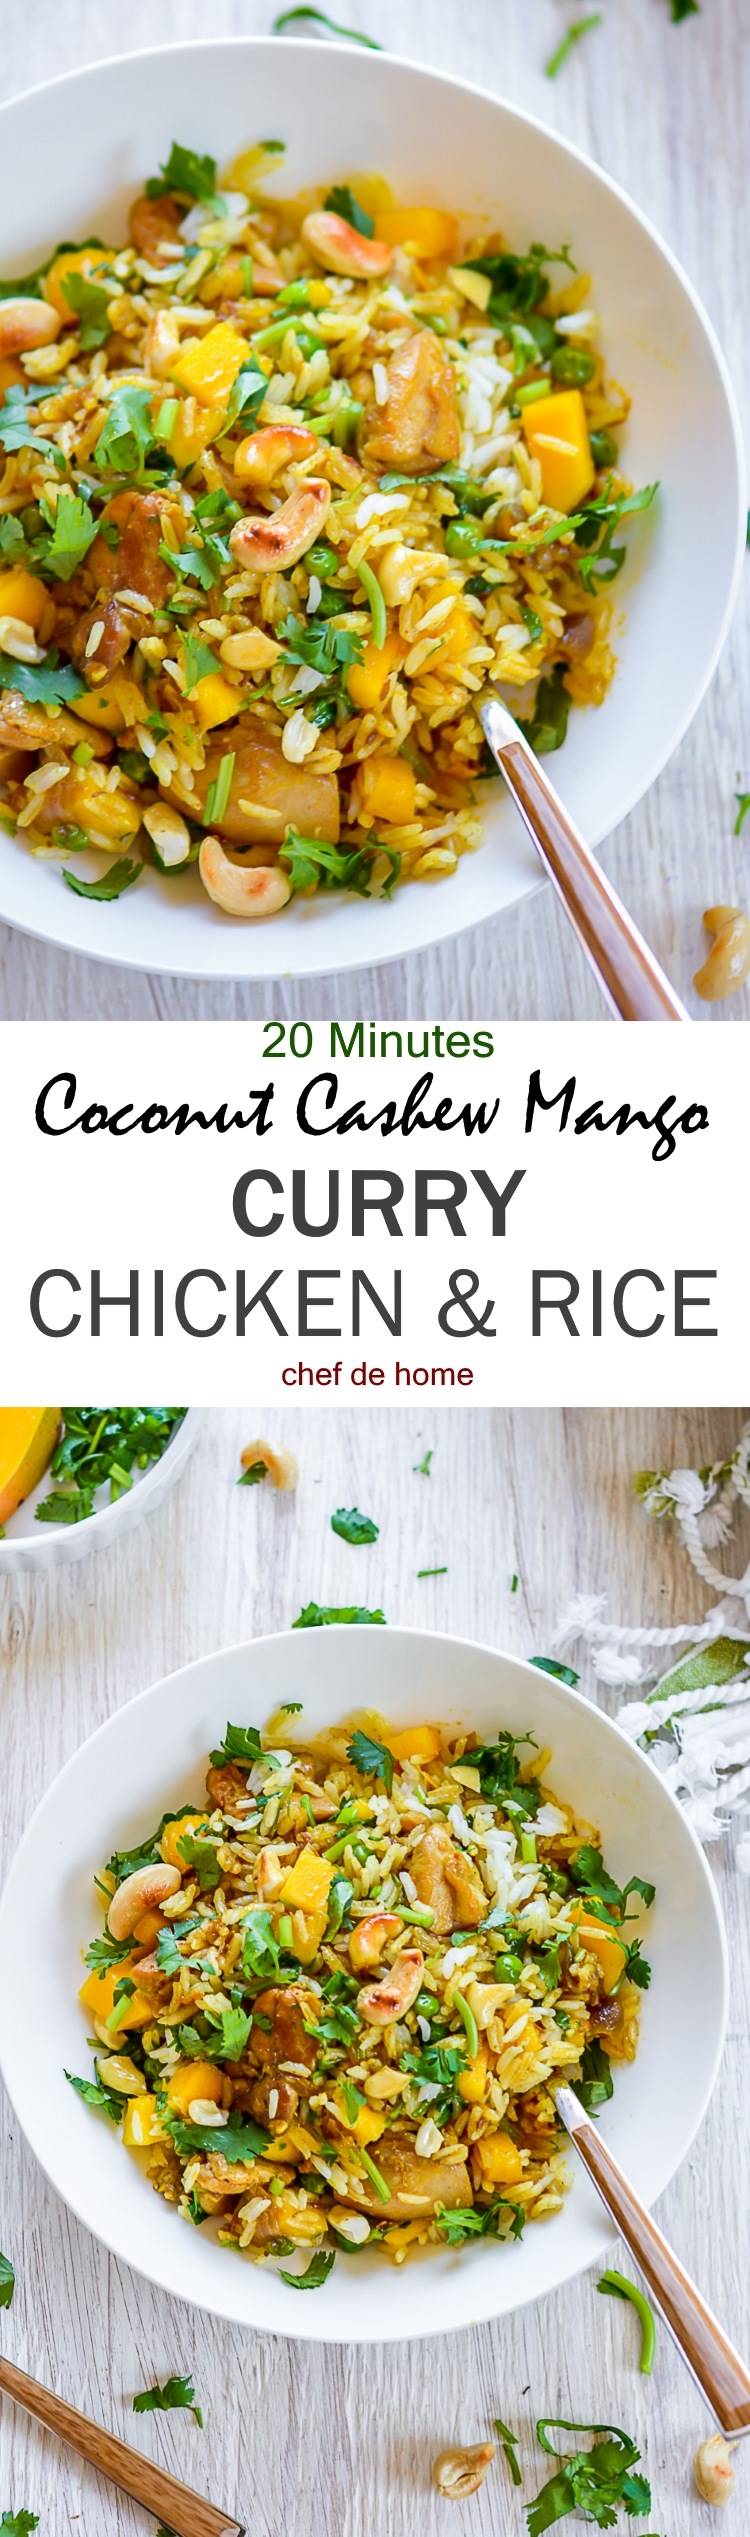 One Pot Coconut Cashew Mango Curry Chicken and Rice | chefdehome.com